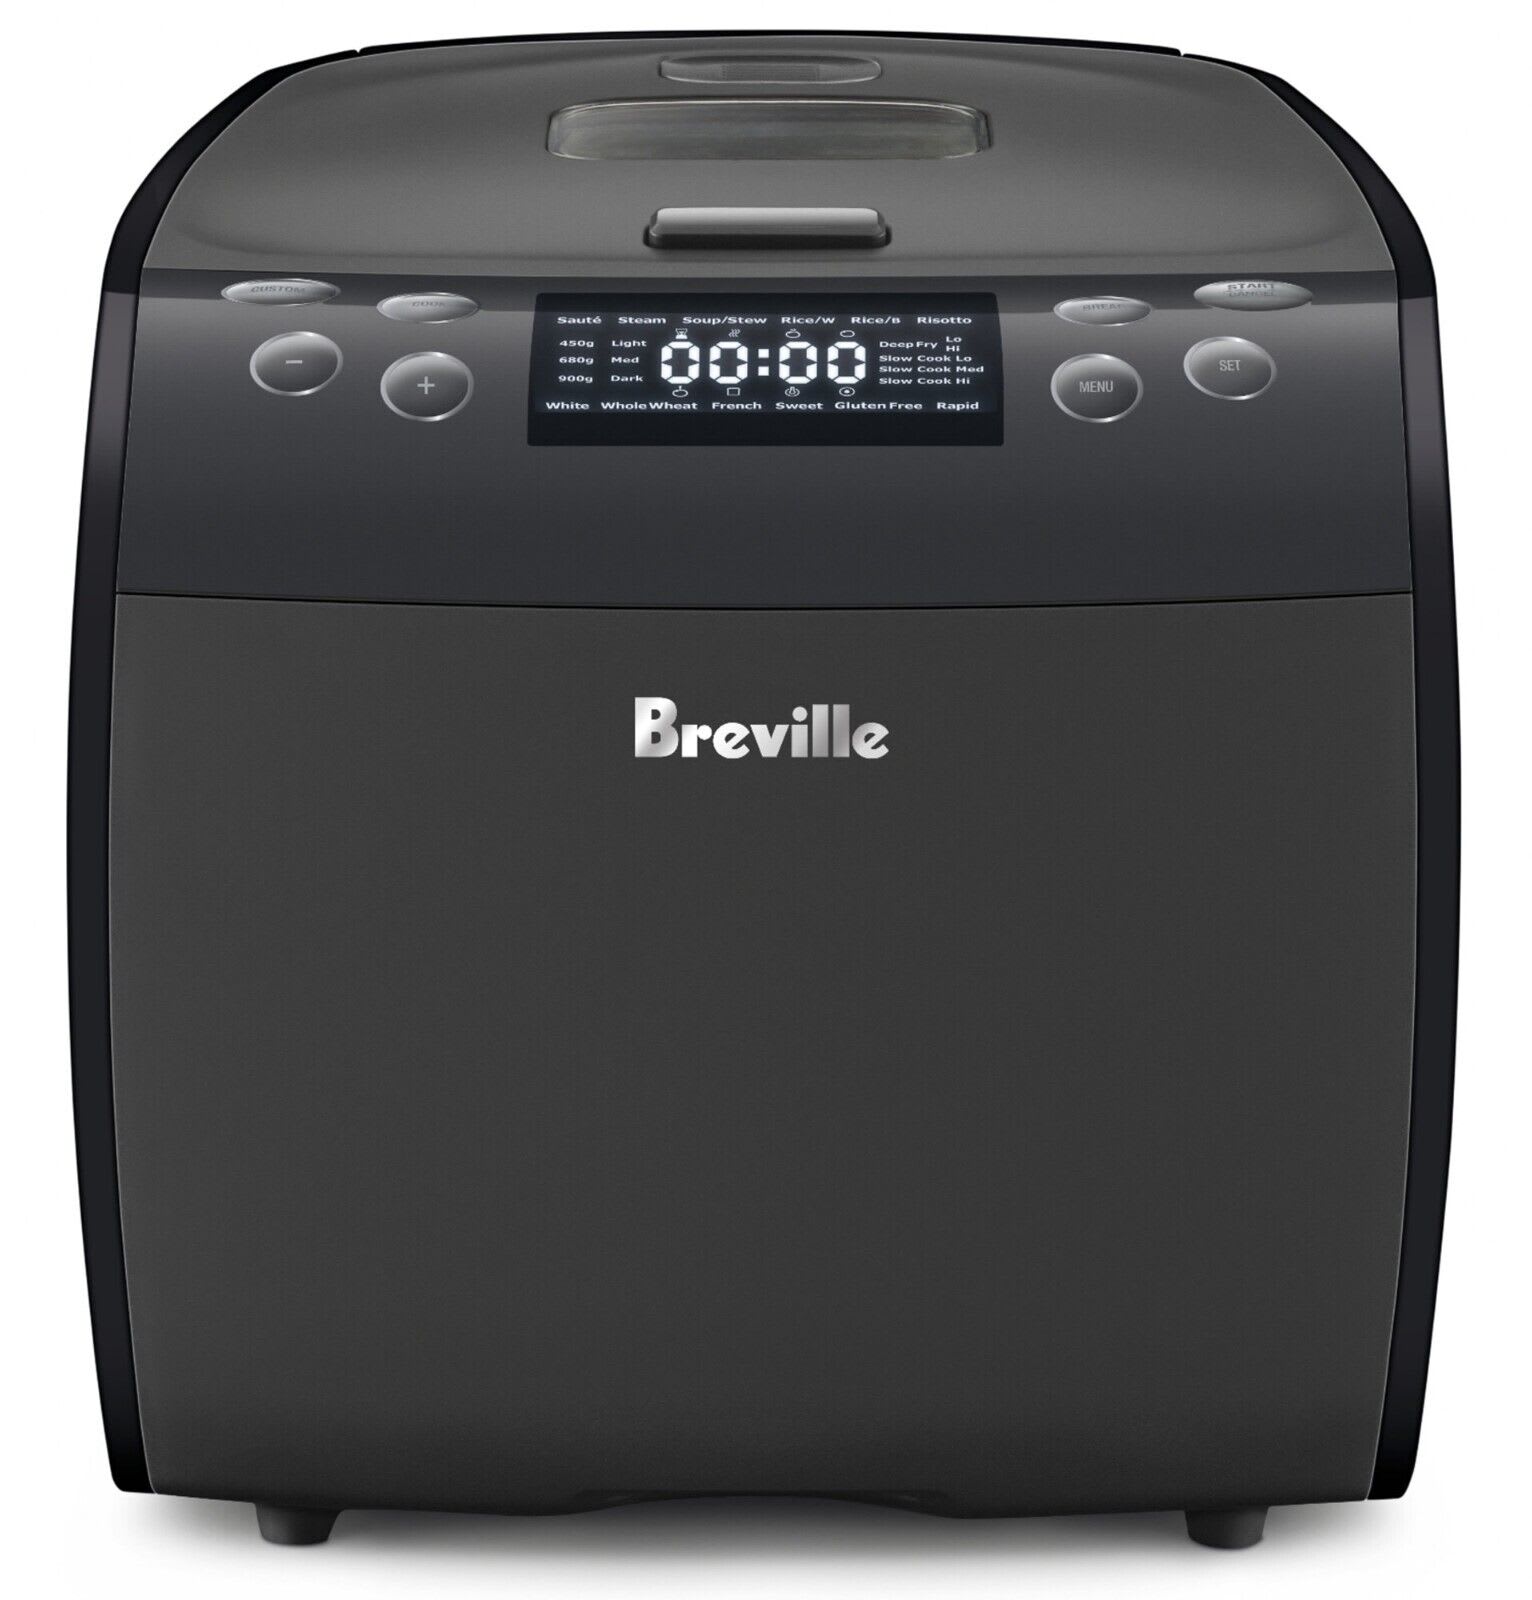 Breville 9-in-1 Multi Chef Slow Cooker